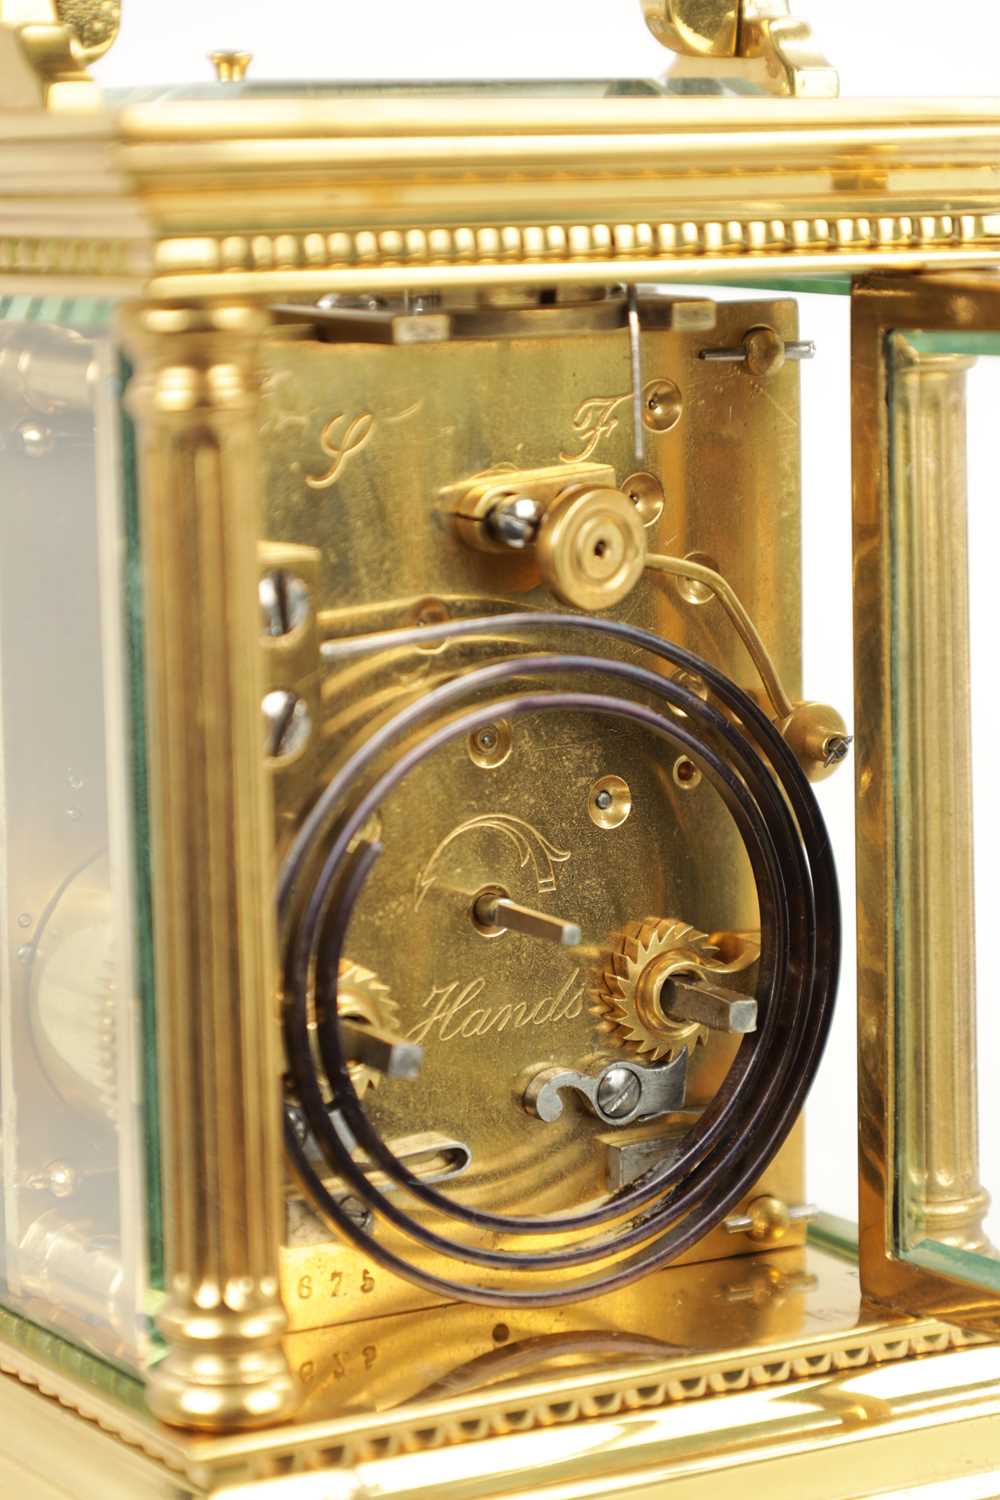 A LATE 19TH CENTURY FRENCH BRASS REPEATING CARRIAGE CLOCK - Image 8 of 9